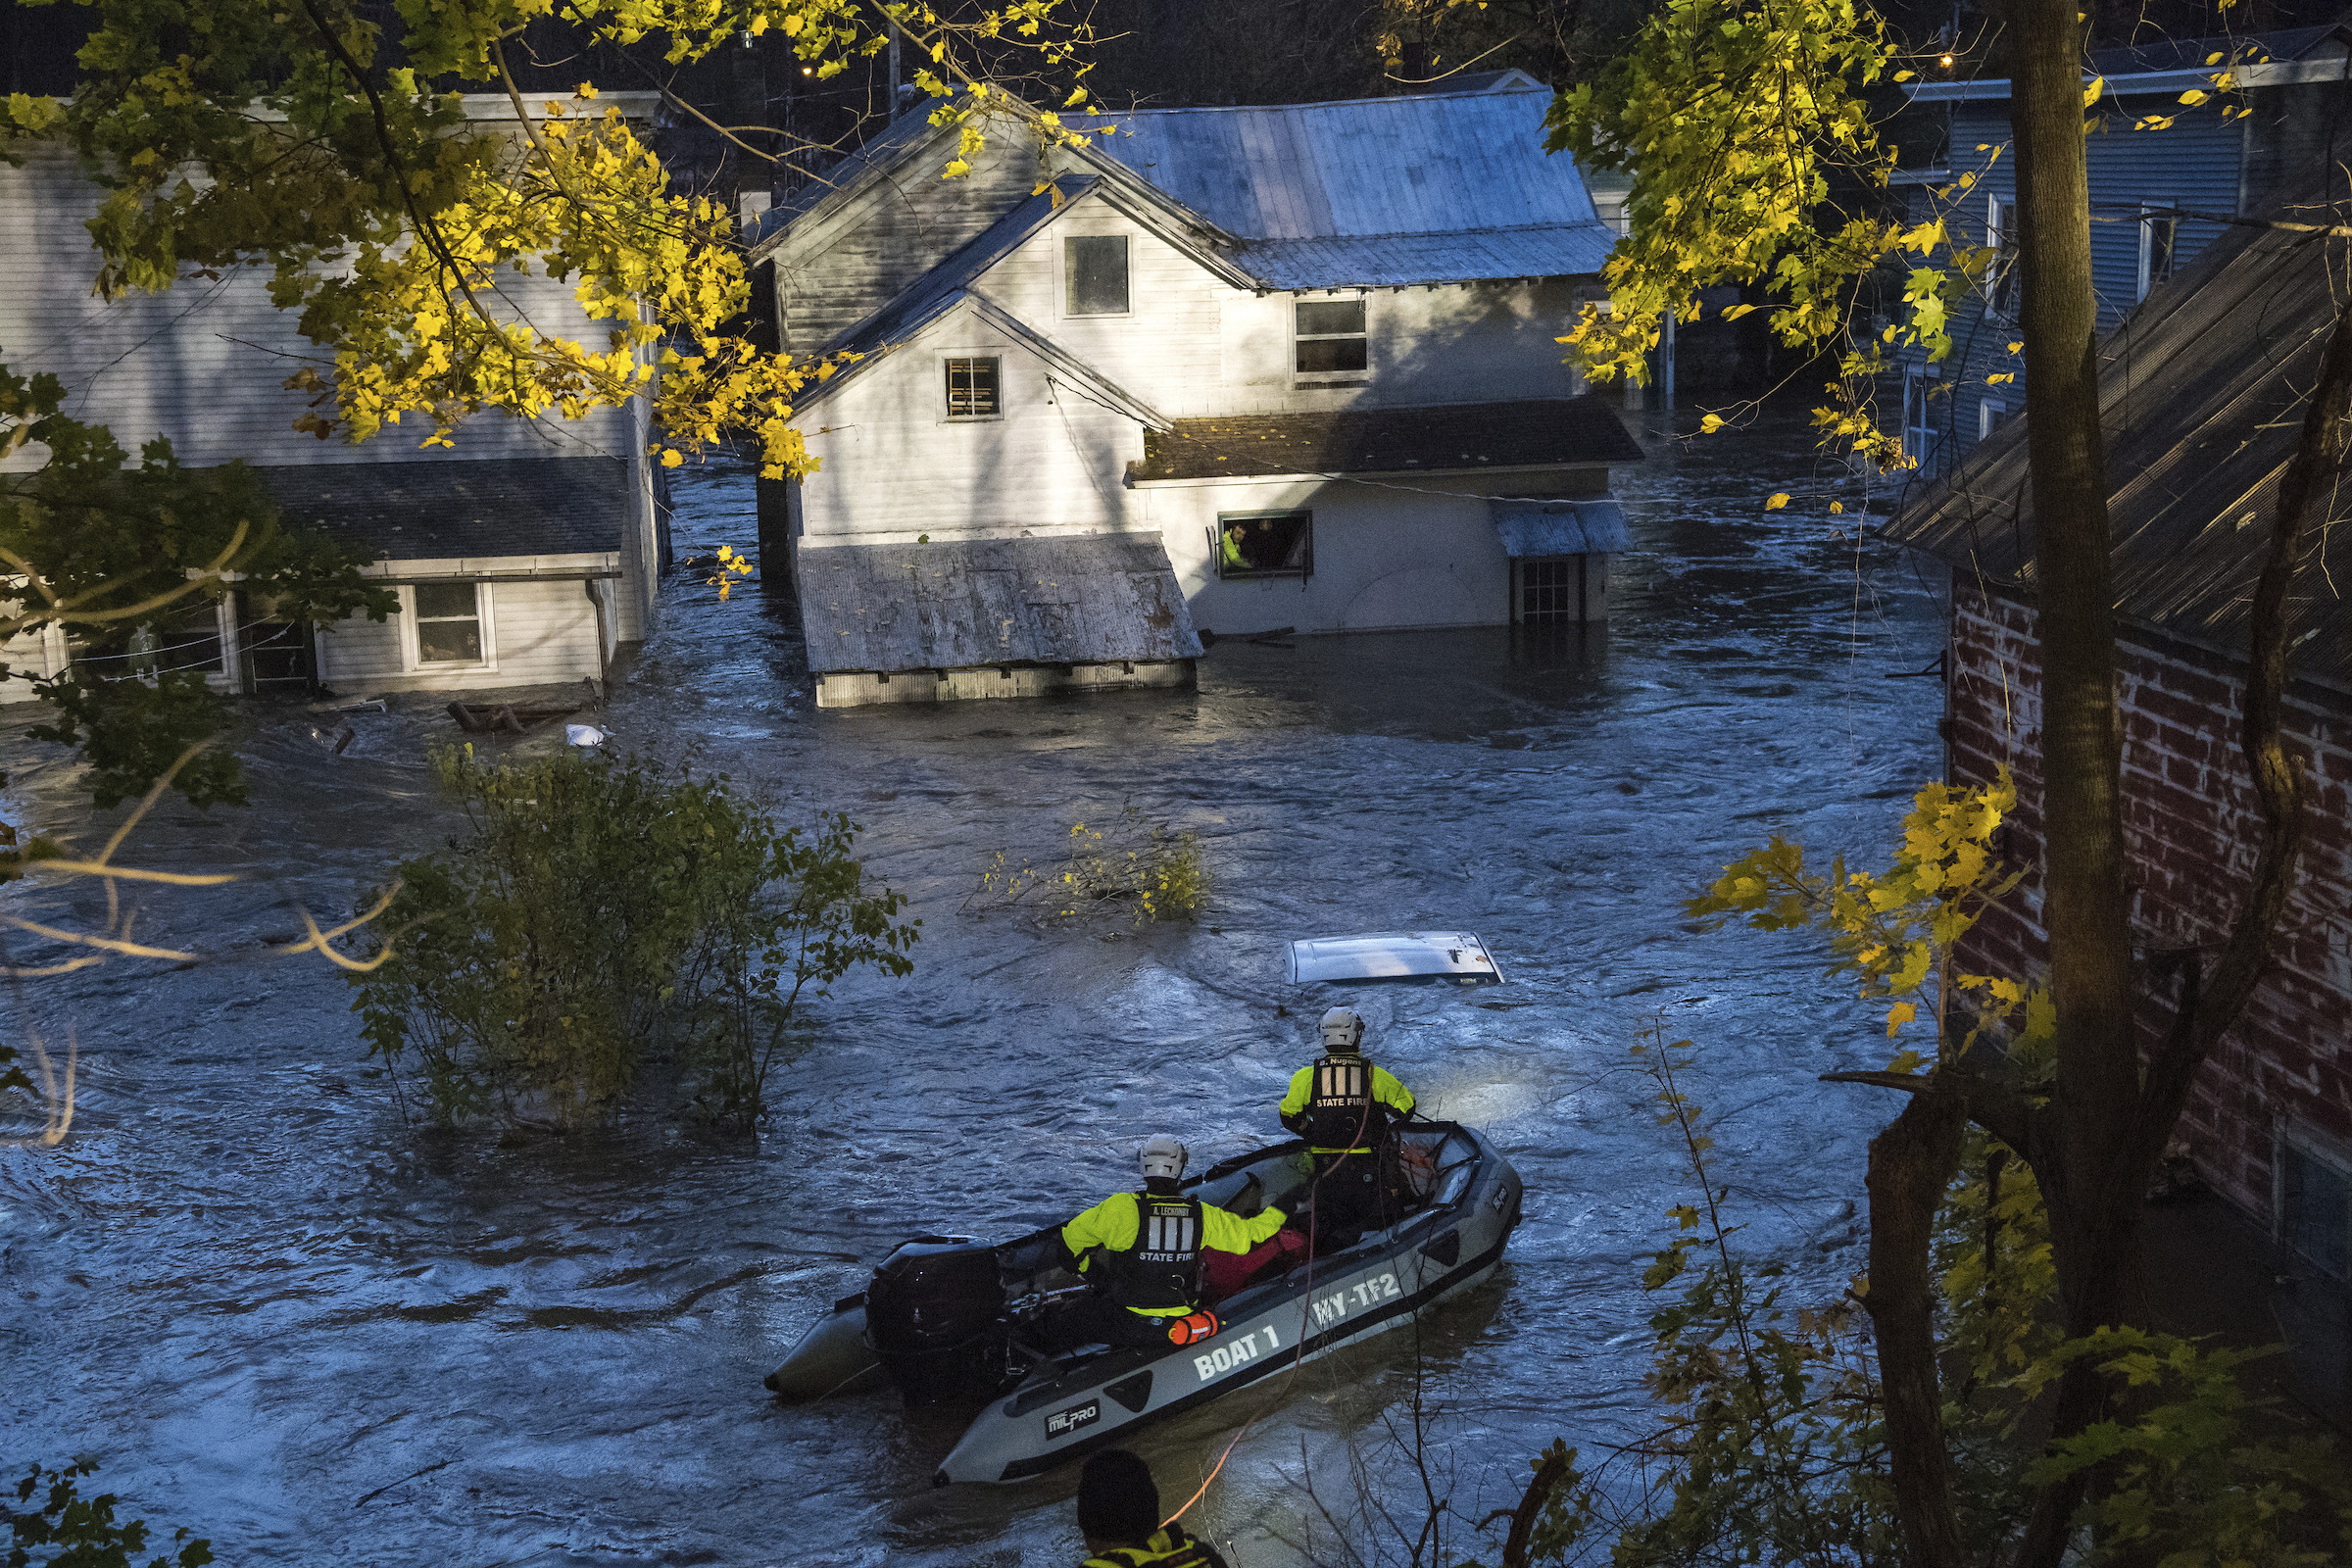 PHOTO: In this photo provided by the New York State Governor's Office, a man looks from a window of a house being flooded by rising waters of the East Canada Creek as police arrive in a rescue boat, Friday, Nov. 1, 2019 in Dolgeville, N.Y.